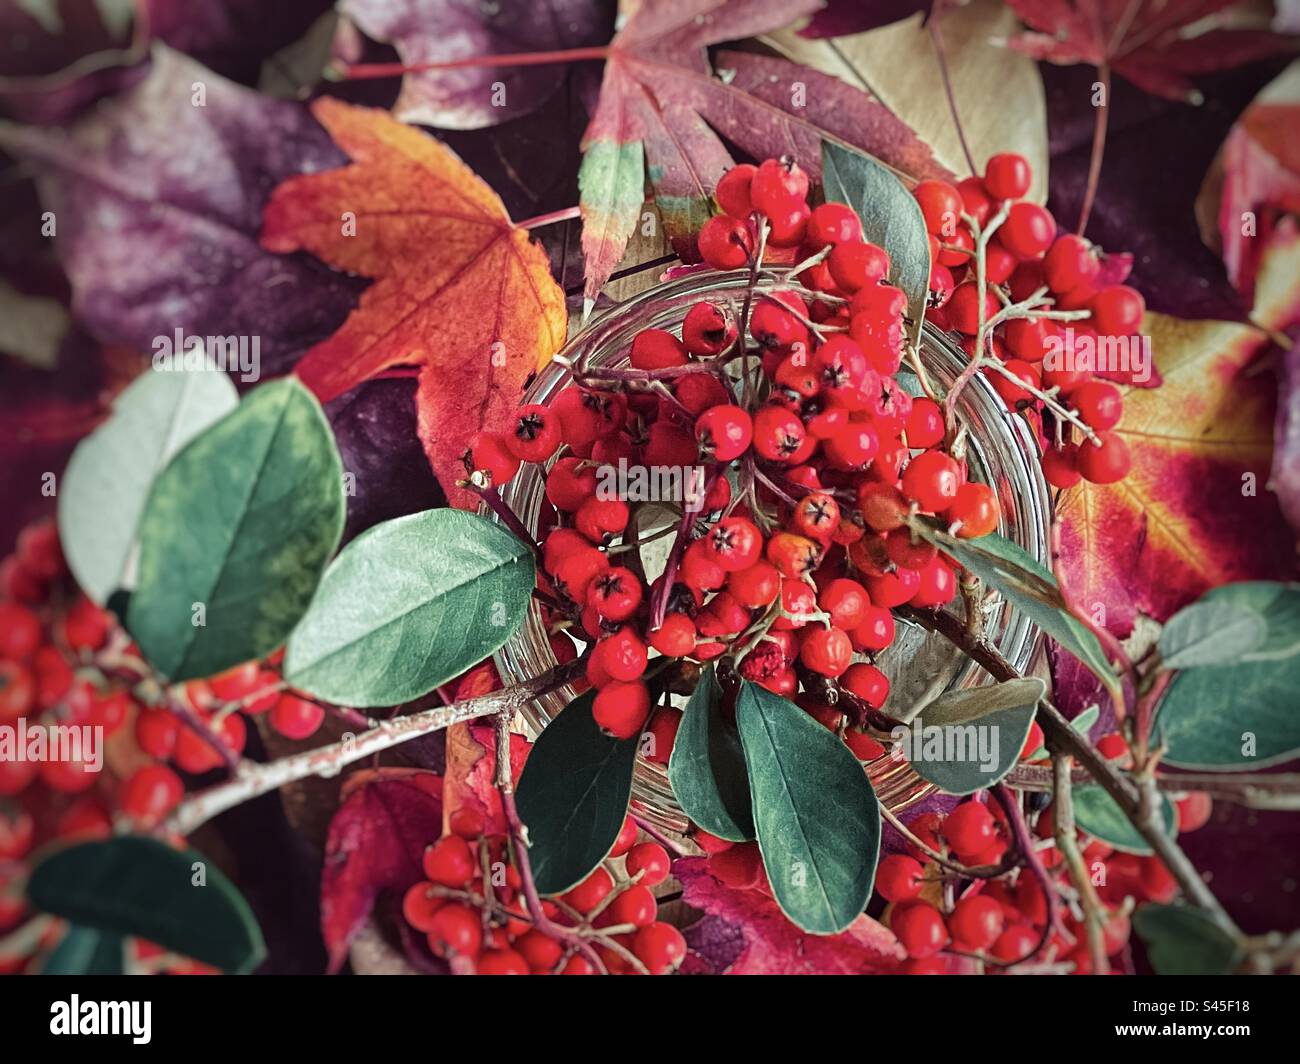 Directly above, close-up view of red Cotoneaster berry branches in glass jar on colorful autumn leaves. Autumn theme. Autumn color. Stock Photo